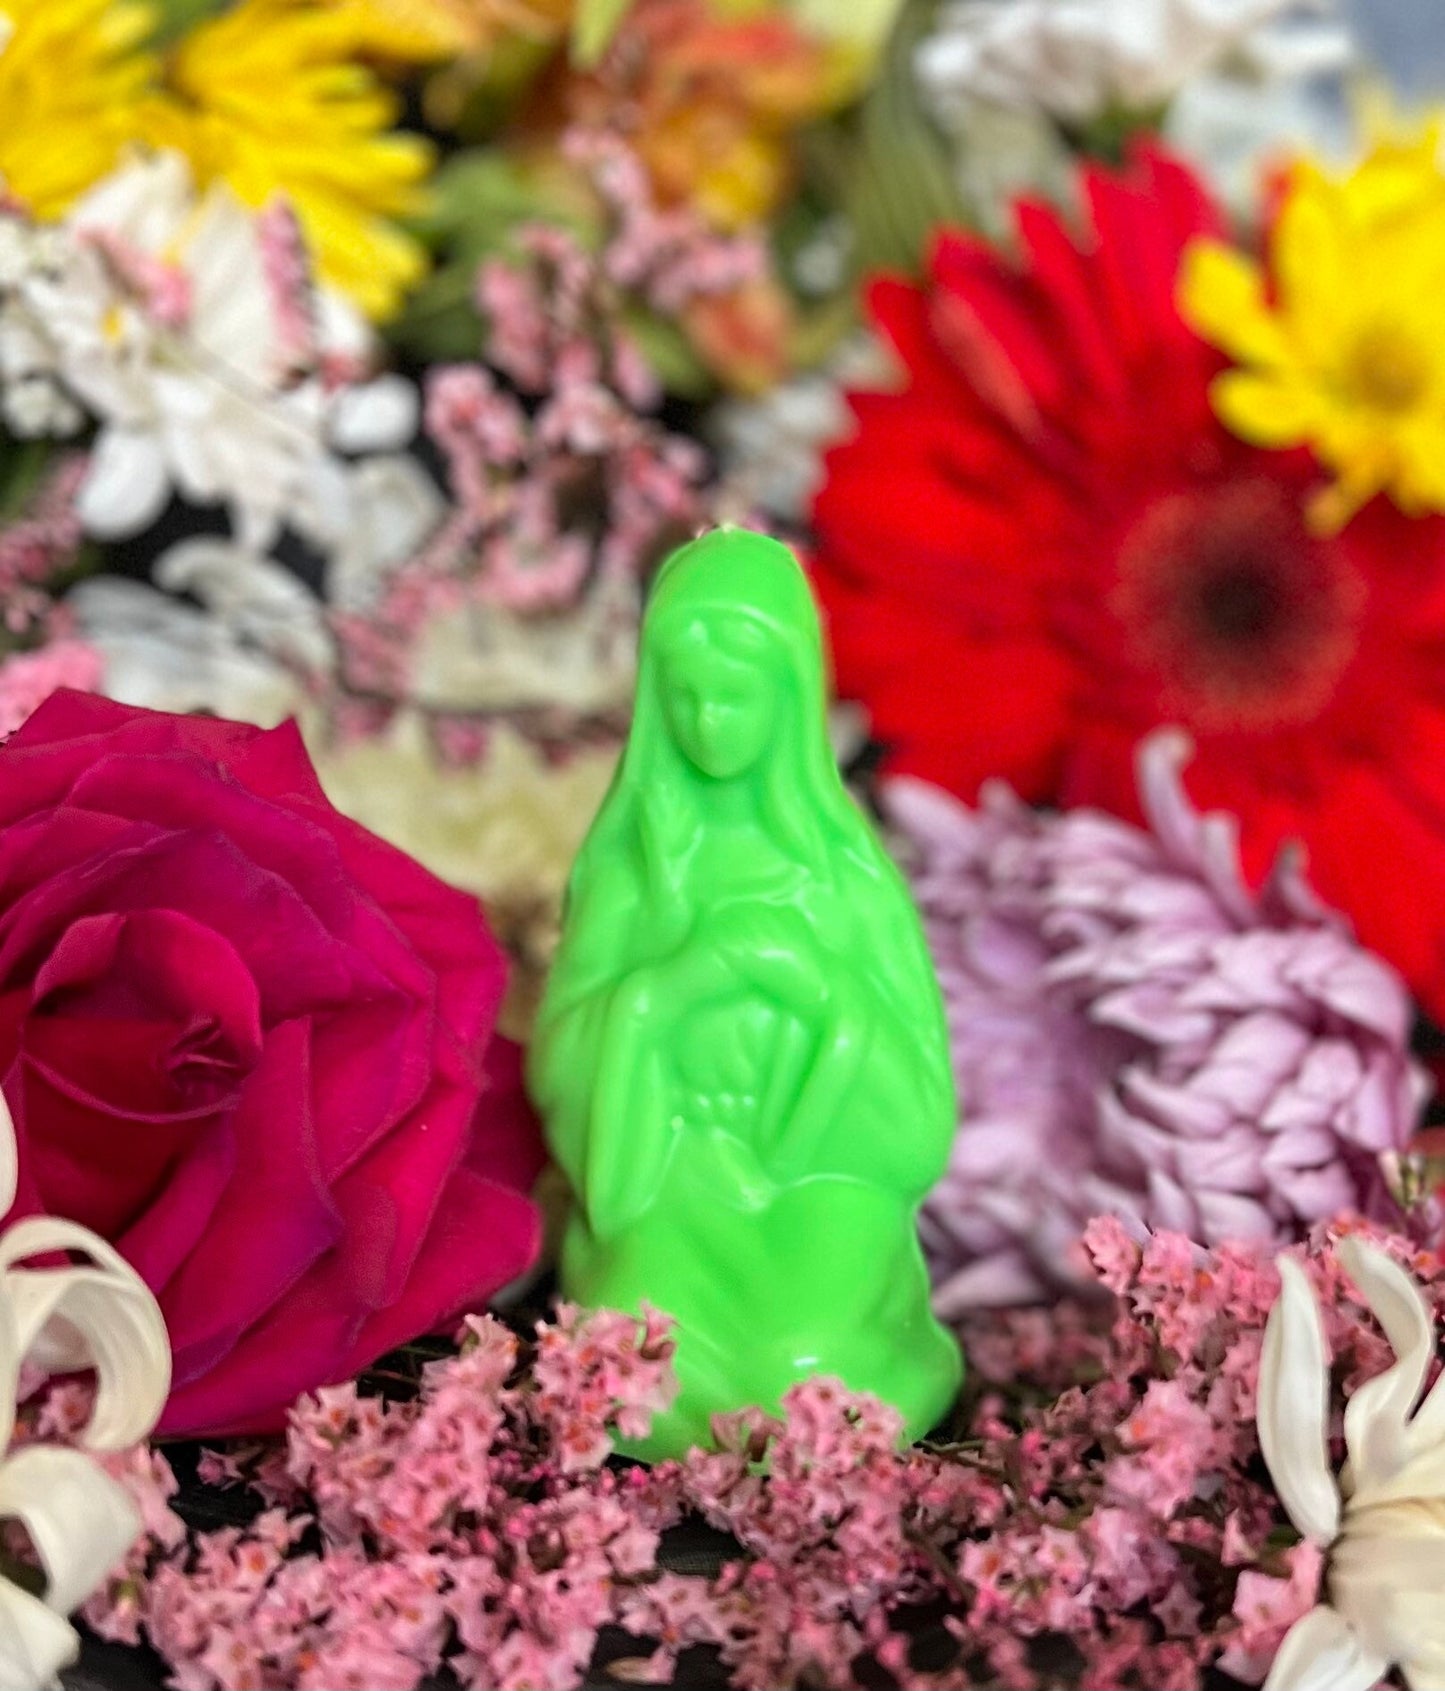 4” Neon Praying Mary Candle + Blessings + Spirituality + Glows under Blacklight